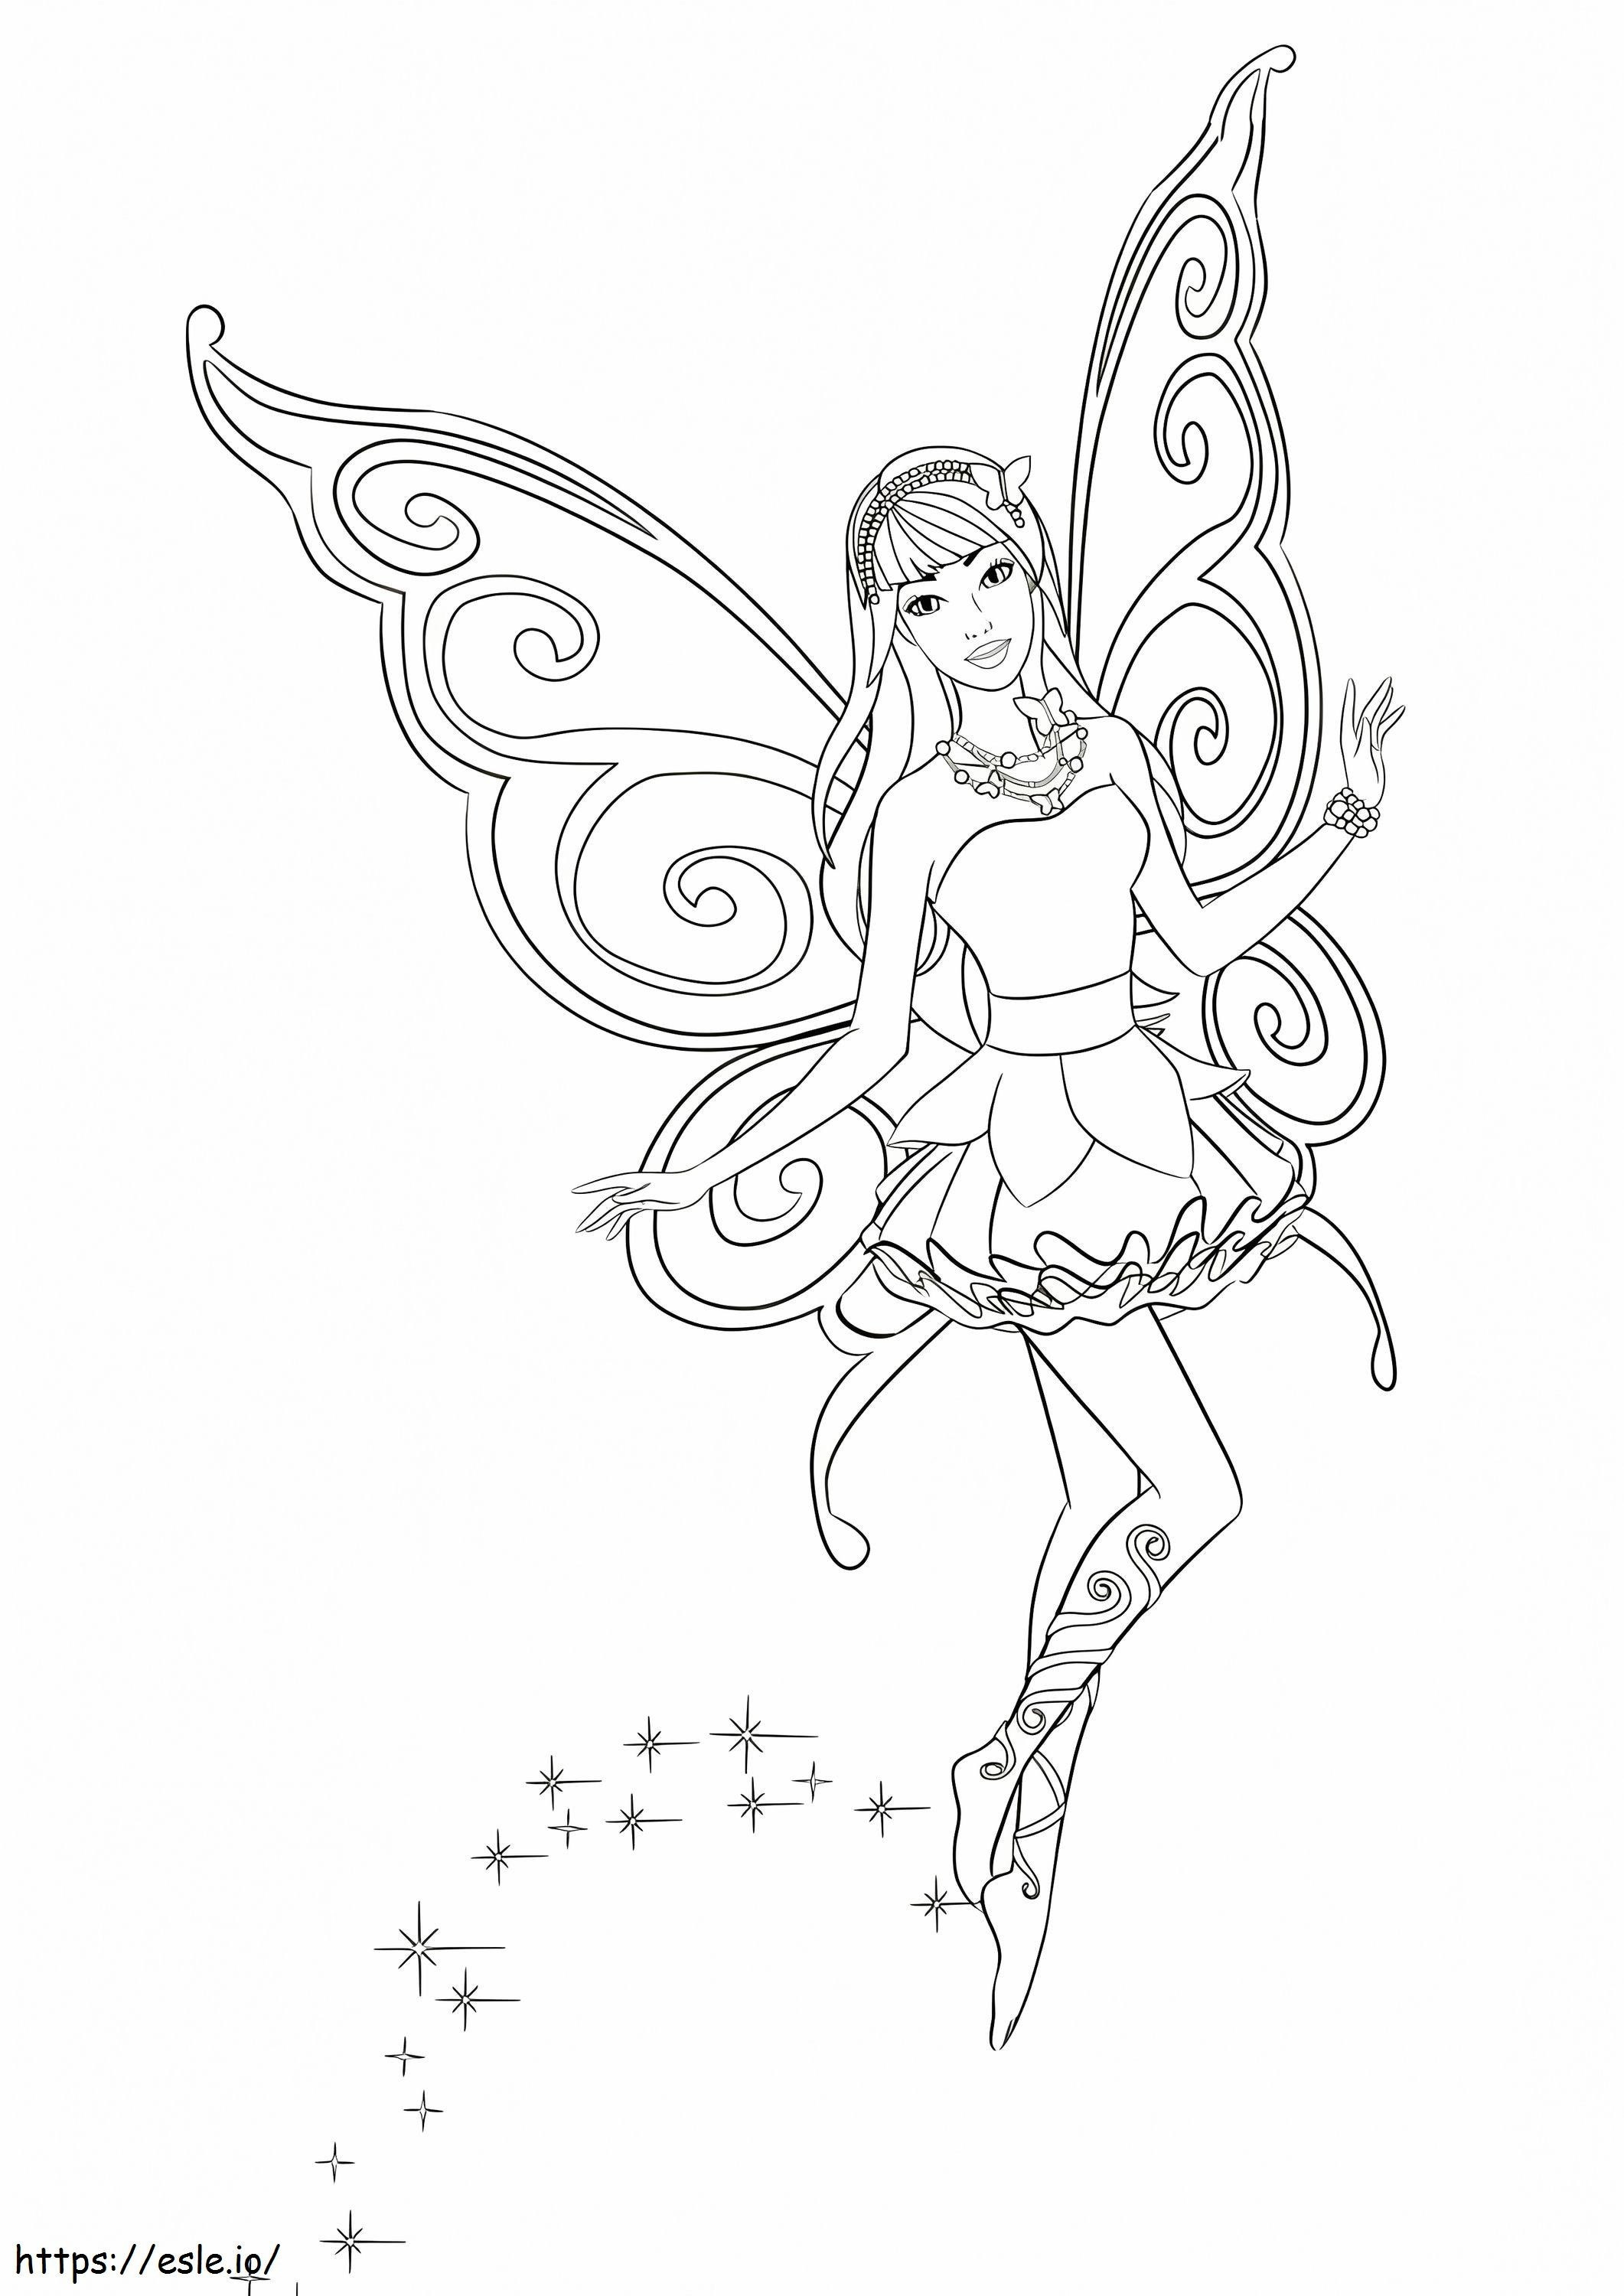 Belle Fee 4 coloring page